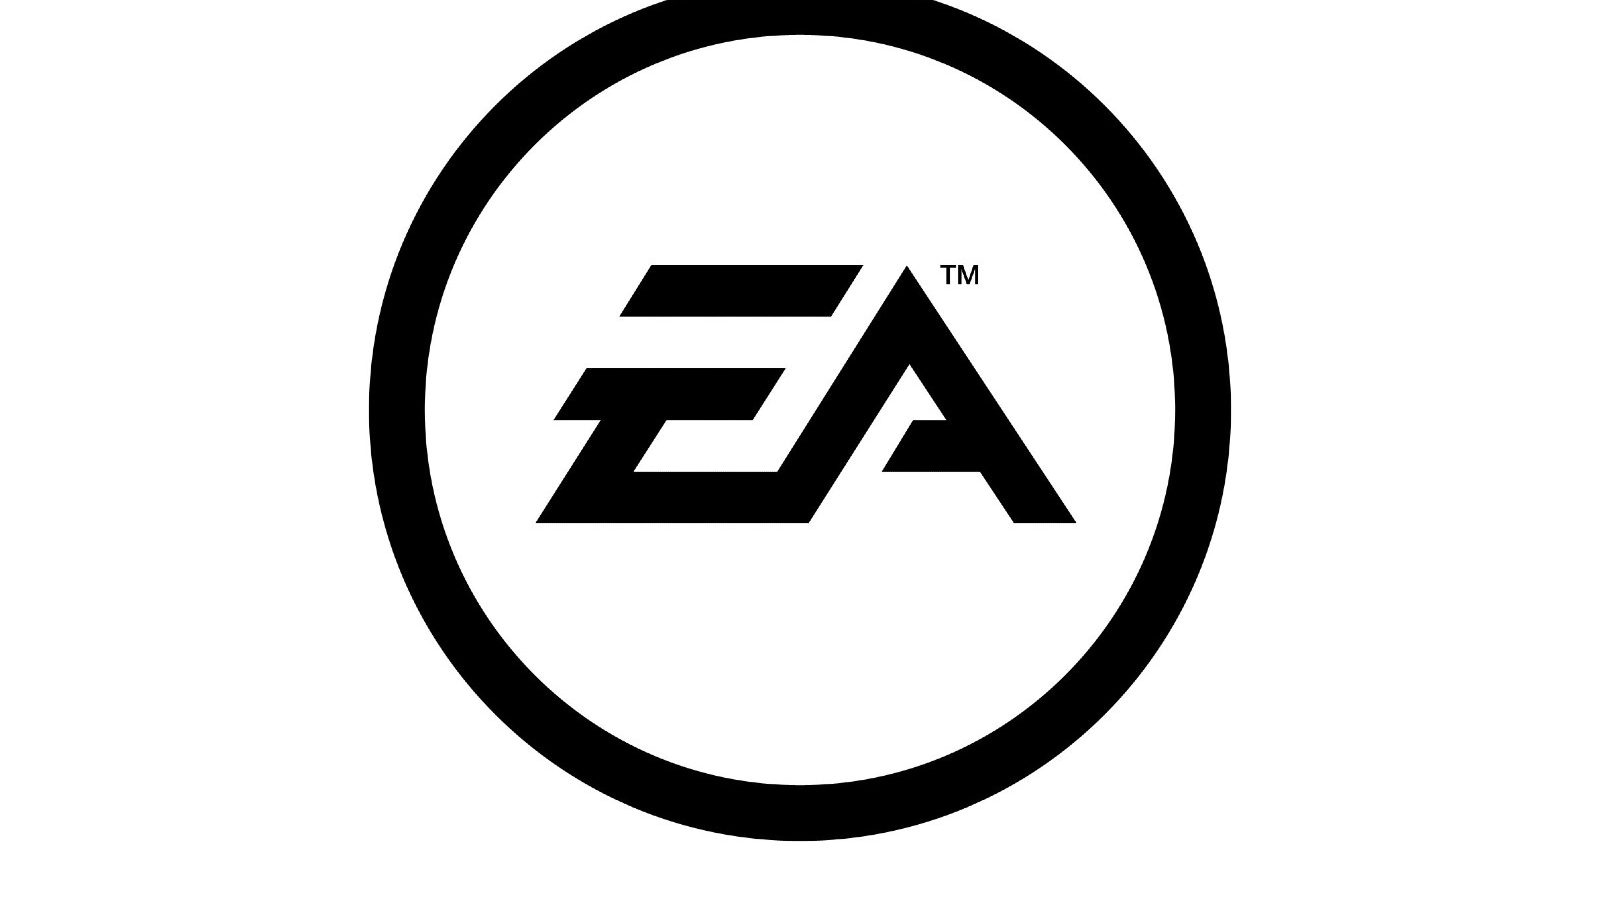 EA Announced Its Anti-Cheat Solution to Be Released with FIFA 23